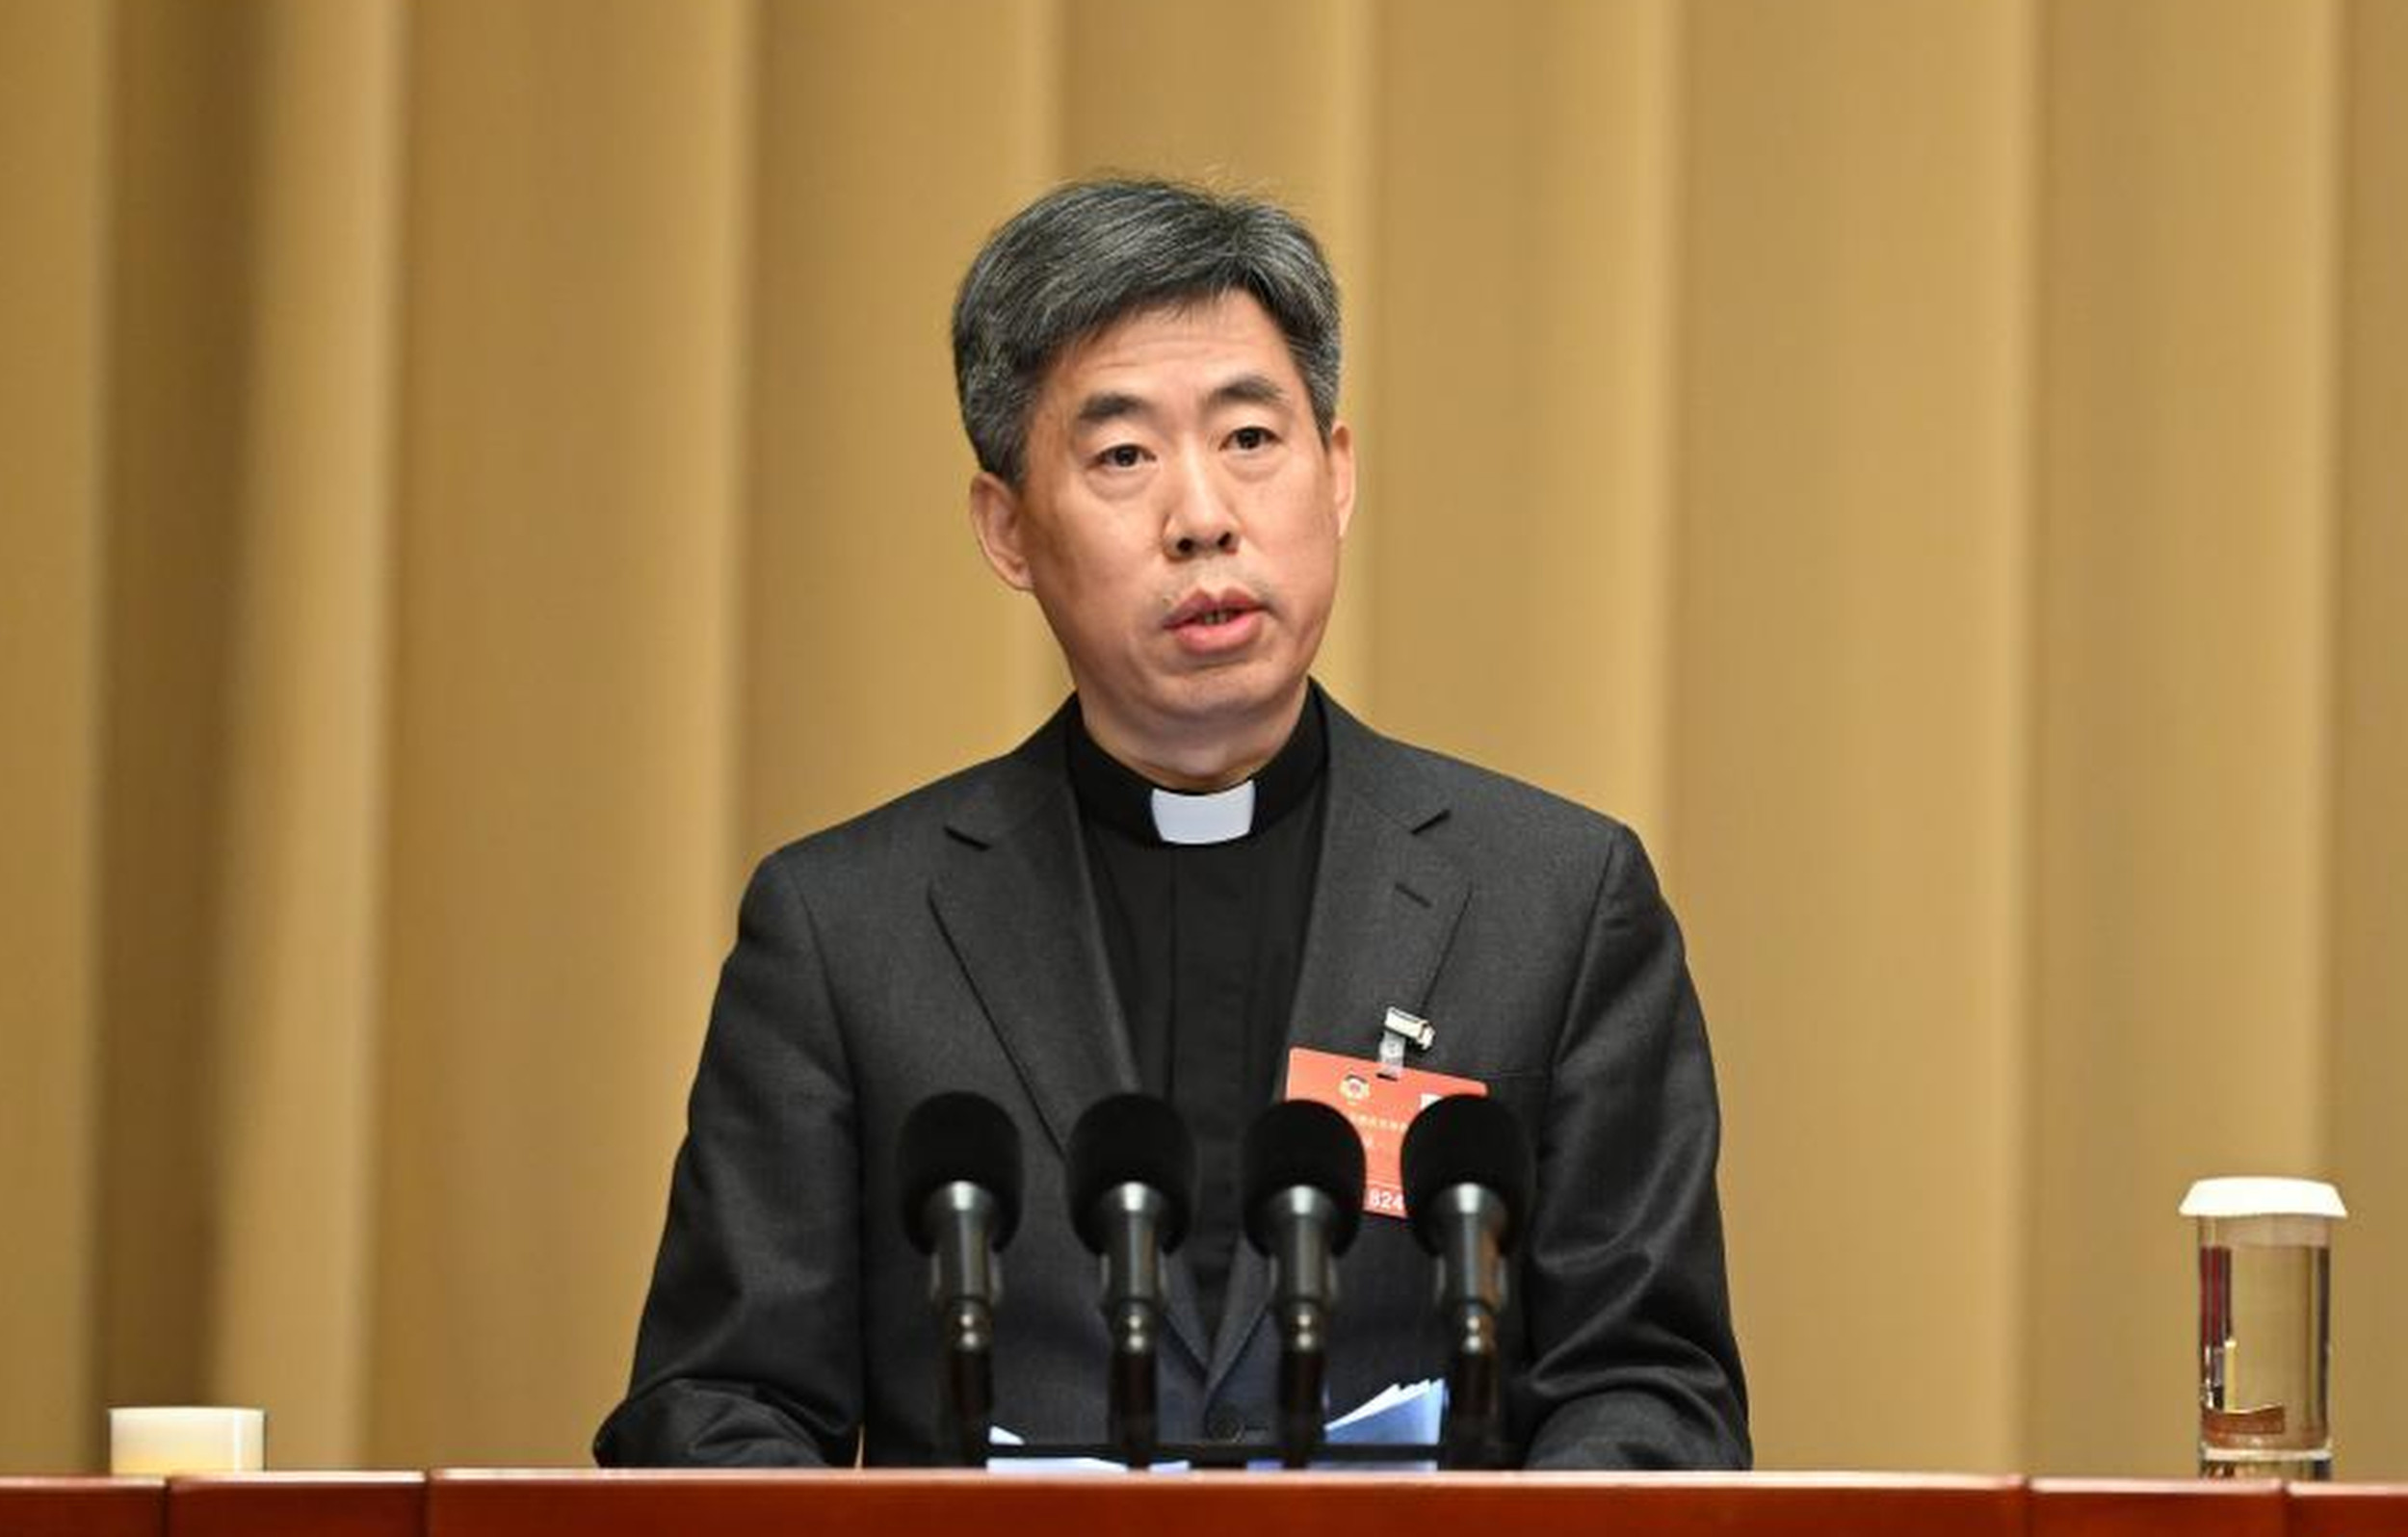 Pope Francis has approved Bishop Shen for the Shanghai diocese because he is an “esteemed pastor”, the Vatican said. Photo: Xinhua